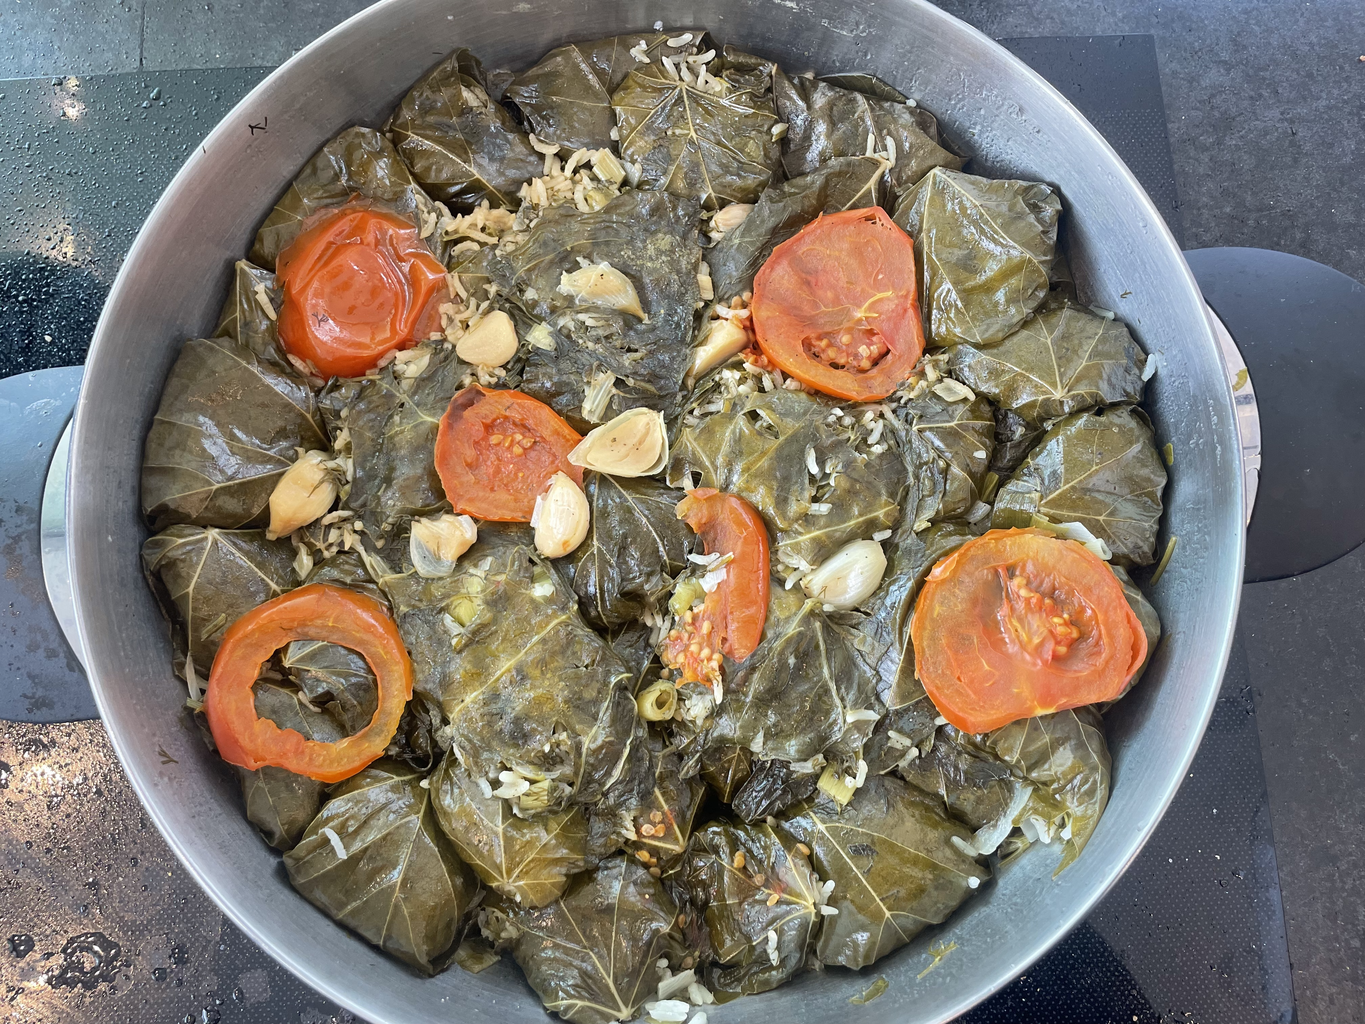 My Gradmother's Famous Stuffed Grape Leaves